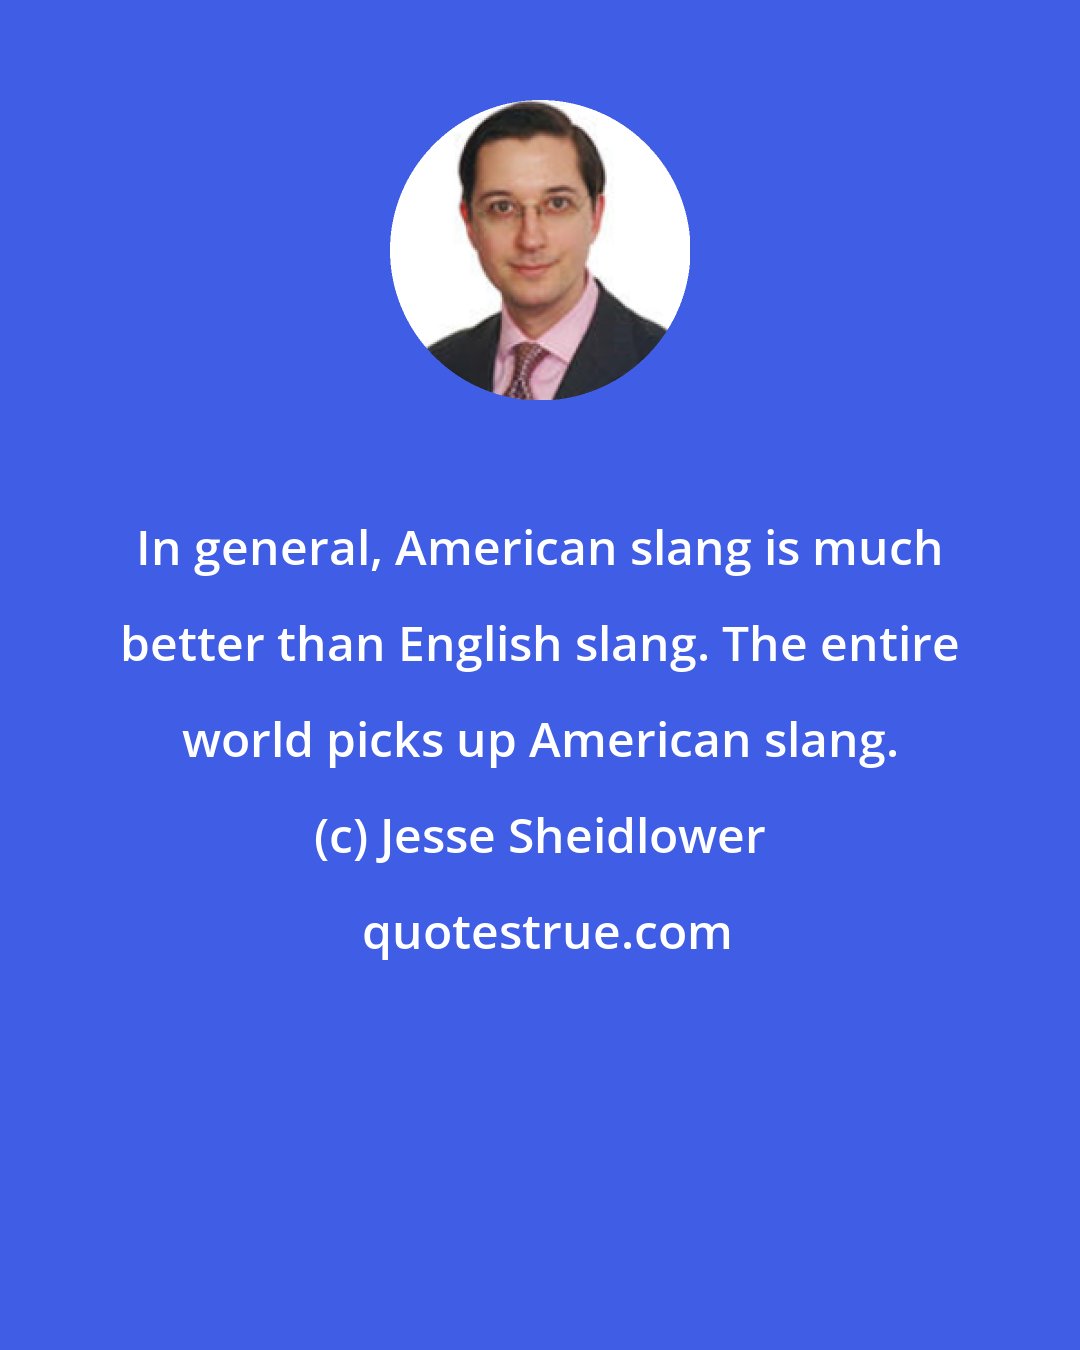 Jesse Sheidlower: In general, American slang is much better than English slang. The entire world picks up American slang.